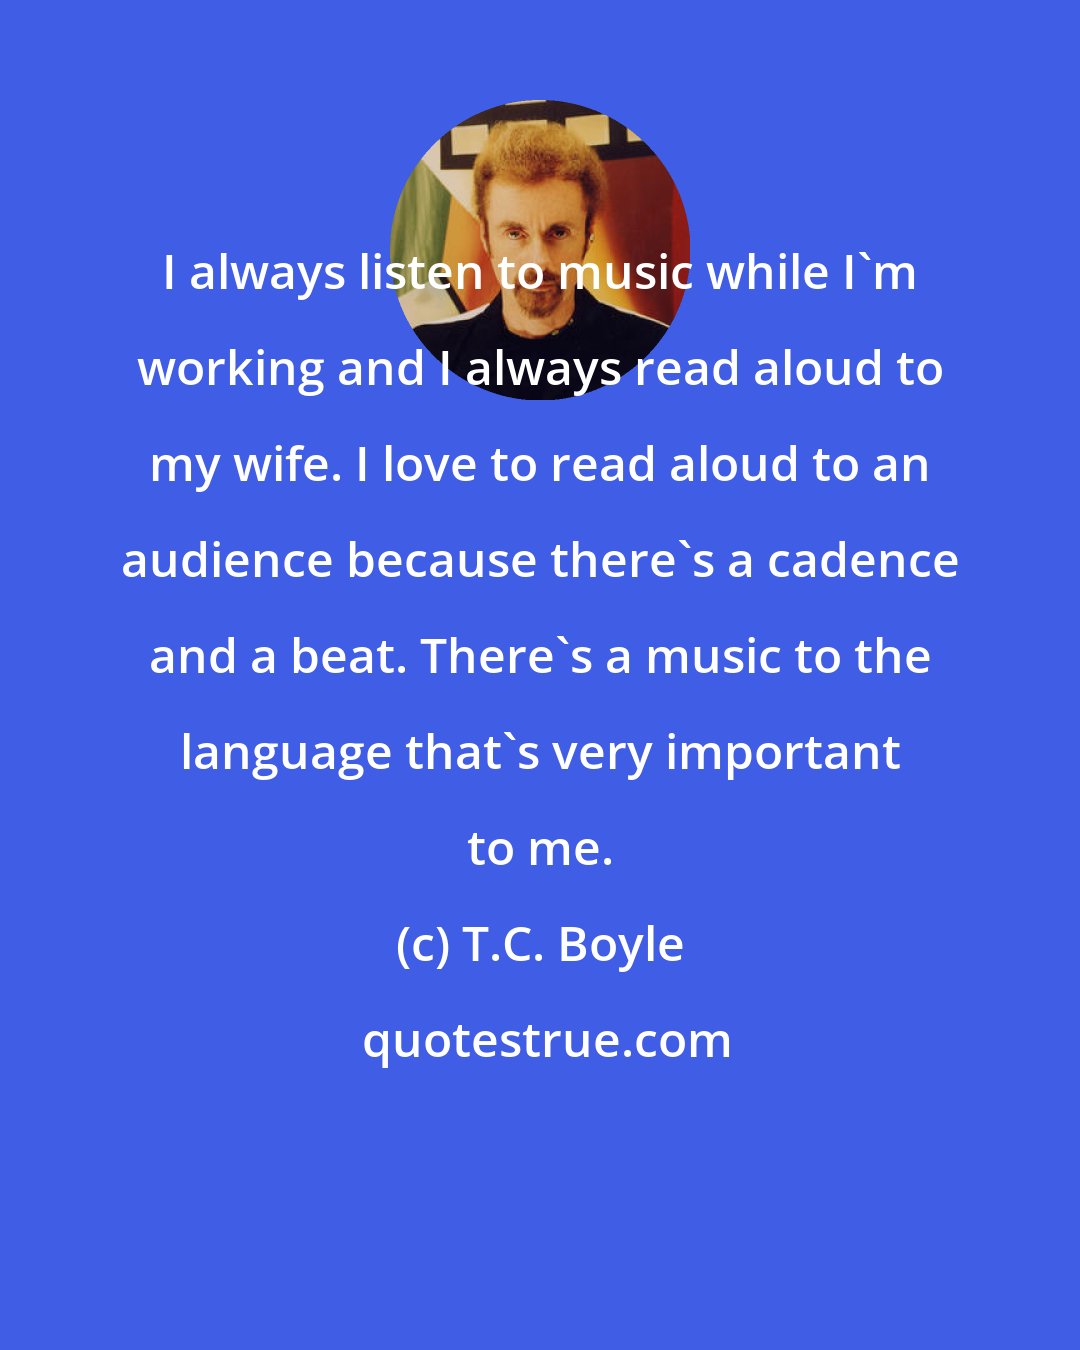 T.C. Boyle: I always listen to music while I'm working and I always read aloud to my wife. I love to read aloud to an audience because there's a cadence and a beat. There's a music to the language that's very important to me.